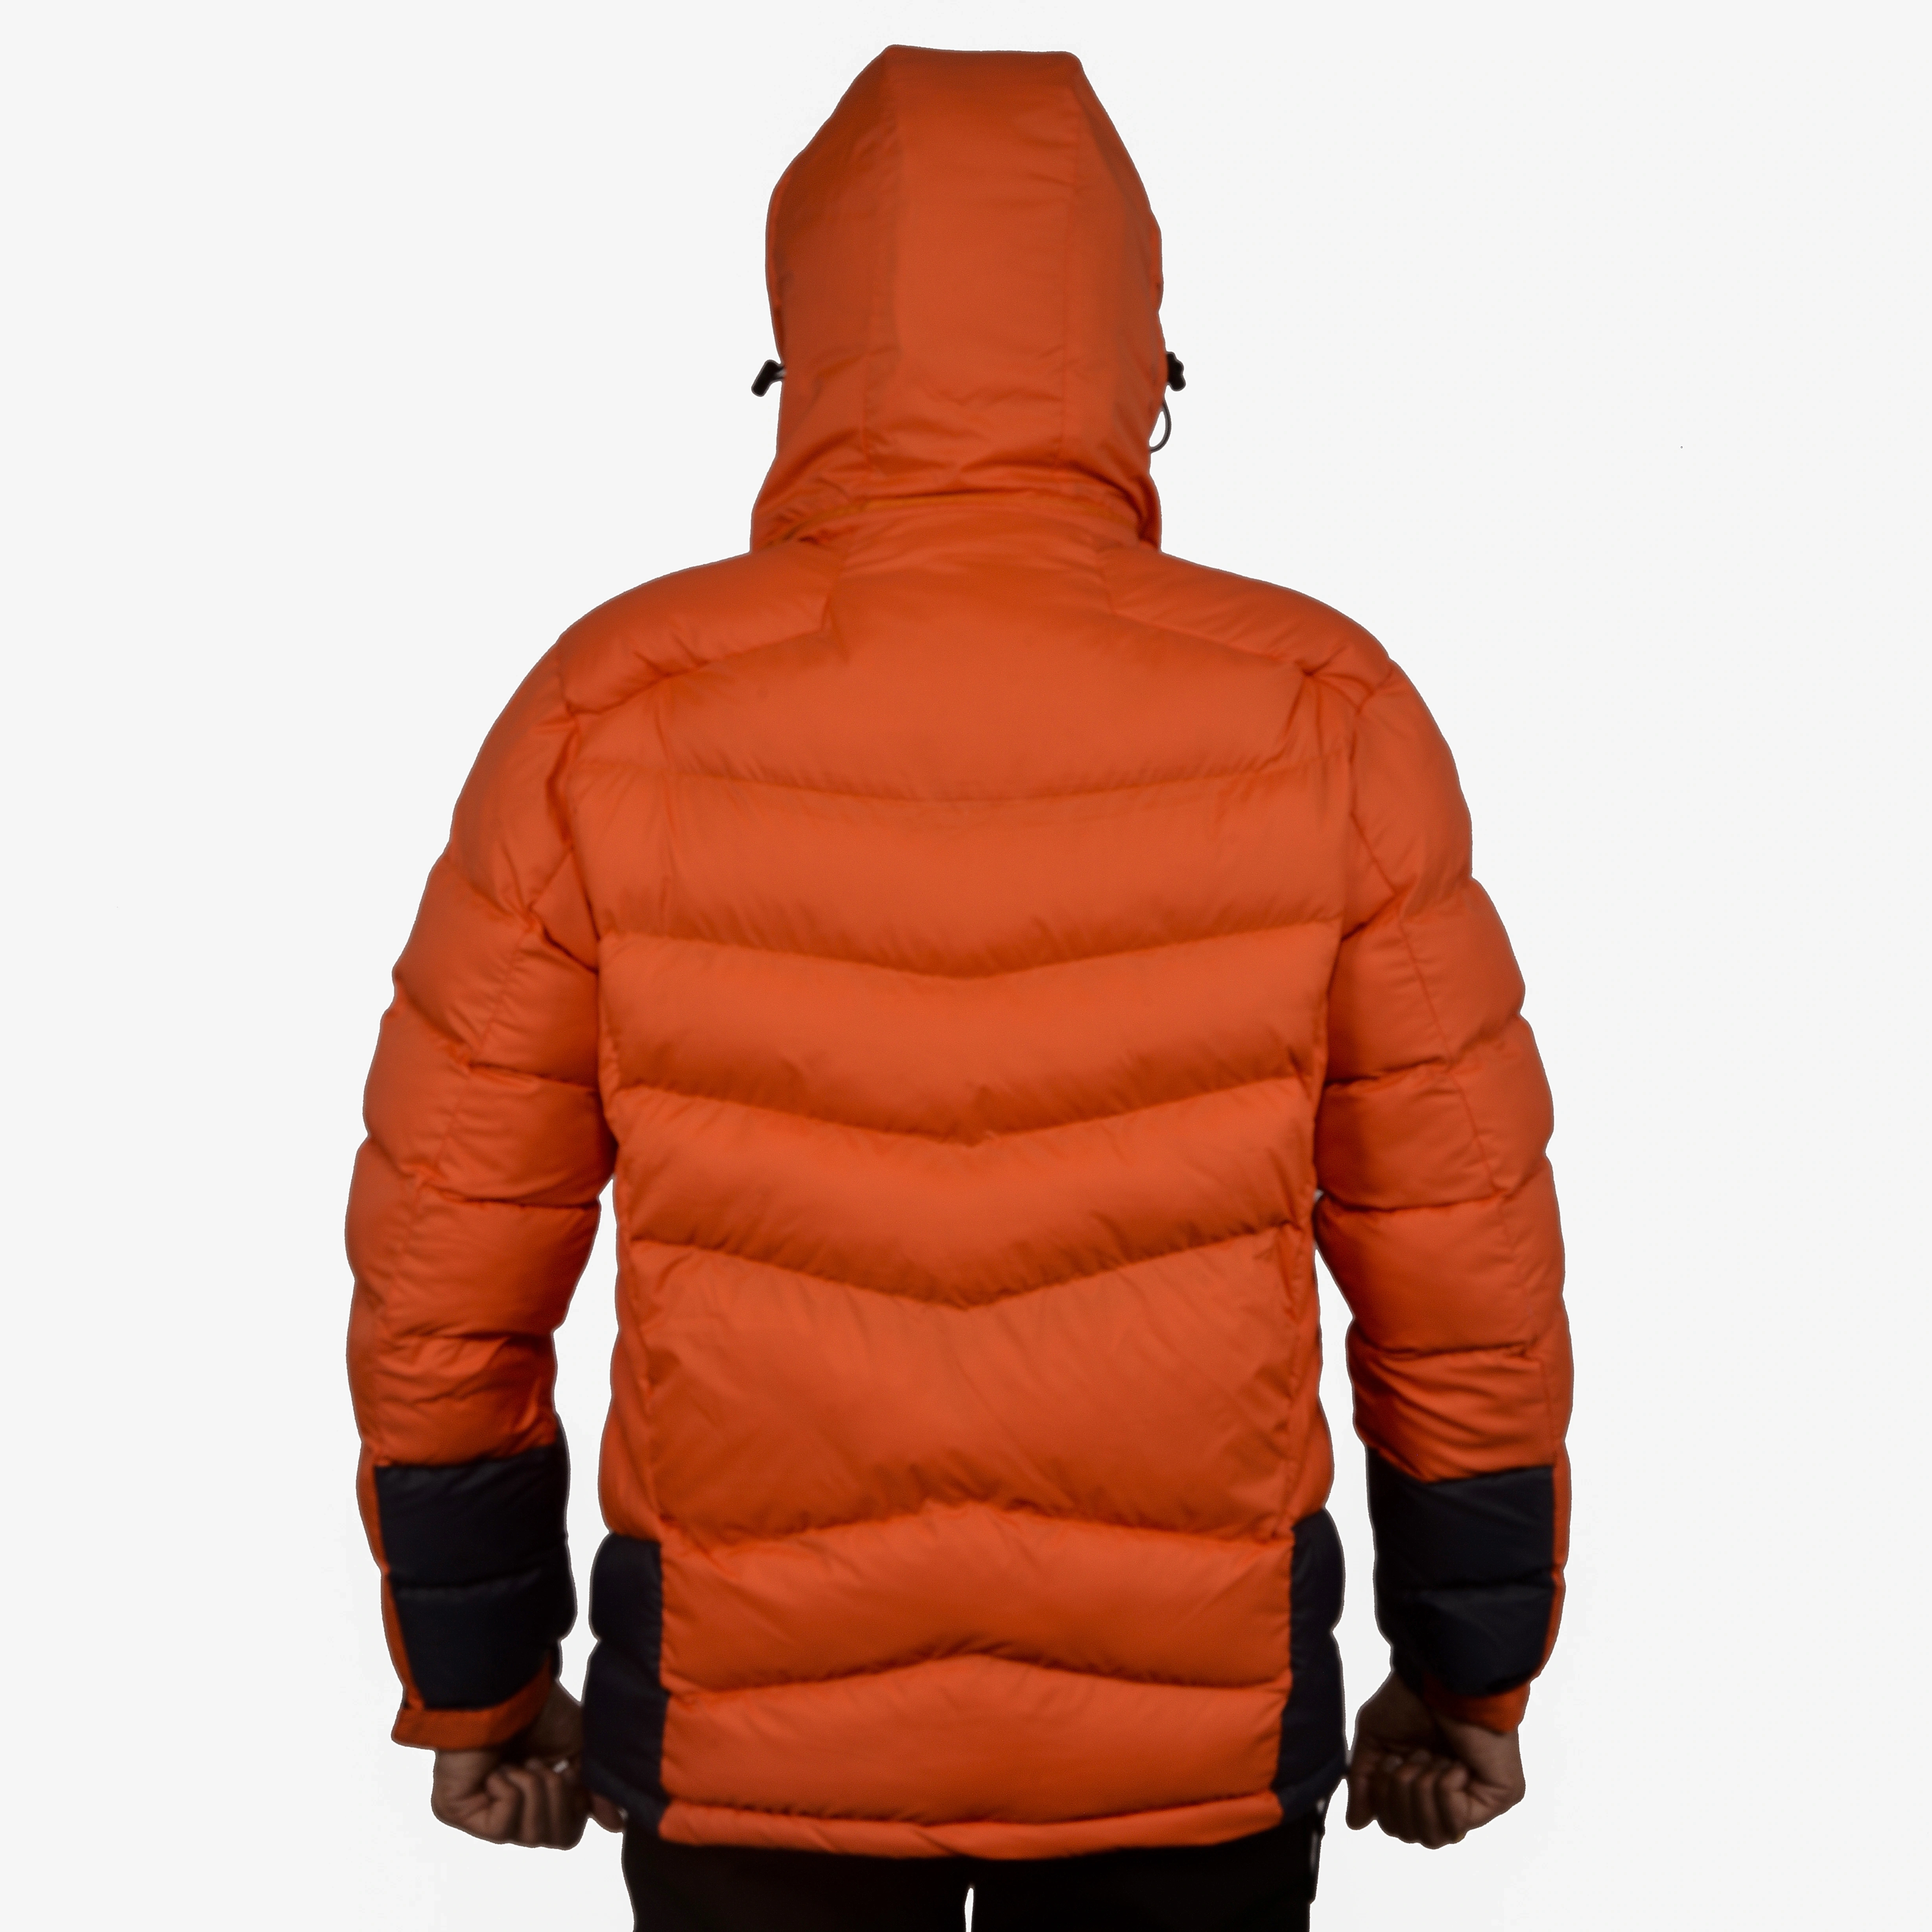 K2 Survivor Down Jacket for Men: Stylized Functionality for Extreme Cold Weather Expeditions (Up to -20°C)-4XL-Orange-3